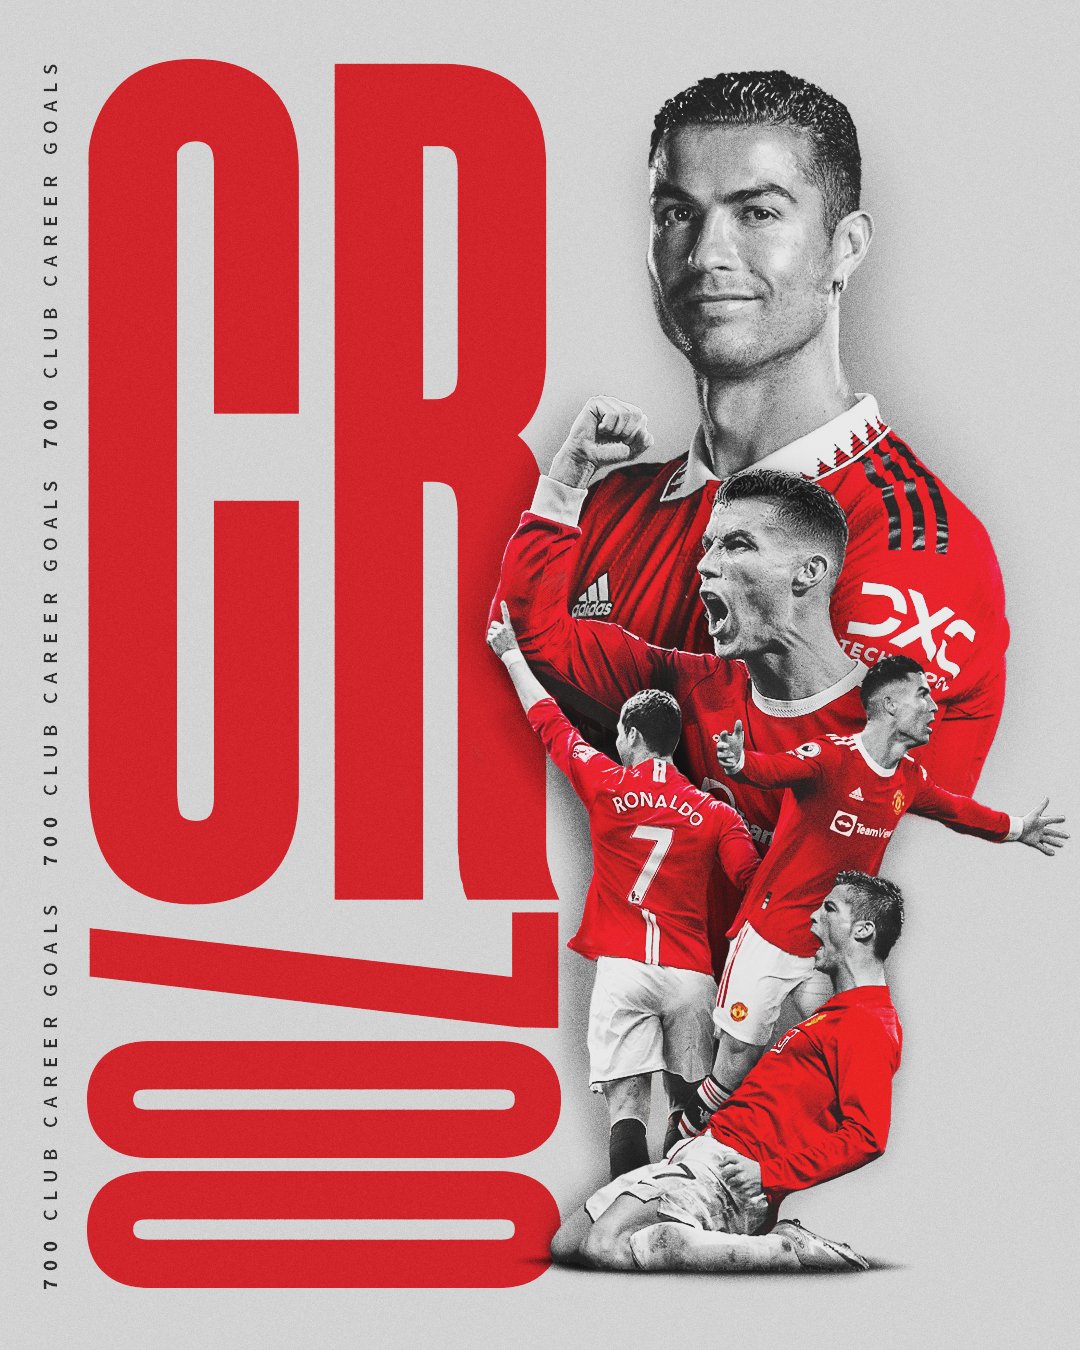 A graphic to acknowledge Cristiano Ronaldo's 700th club career goal.